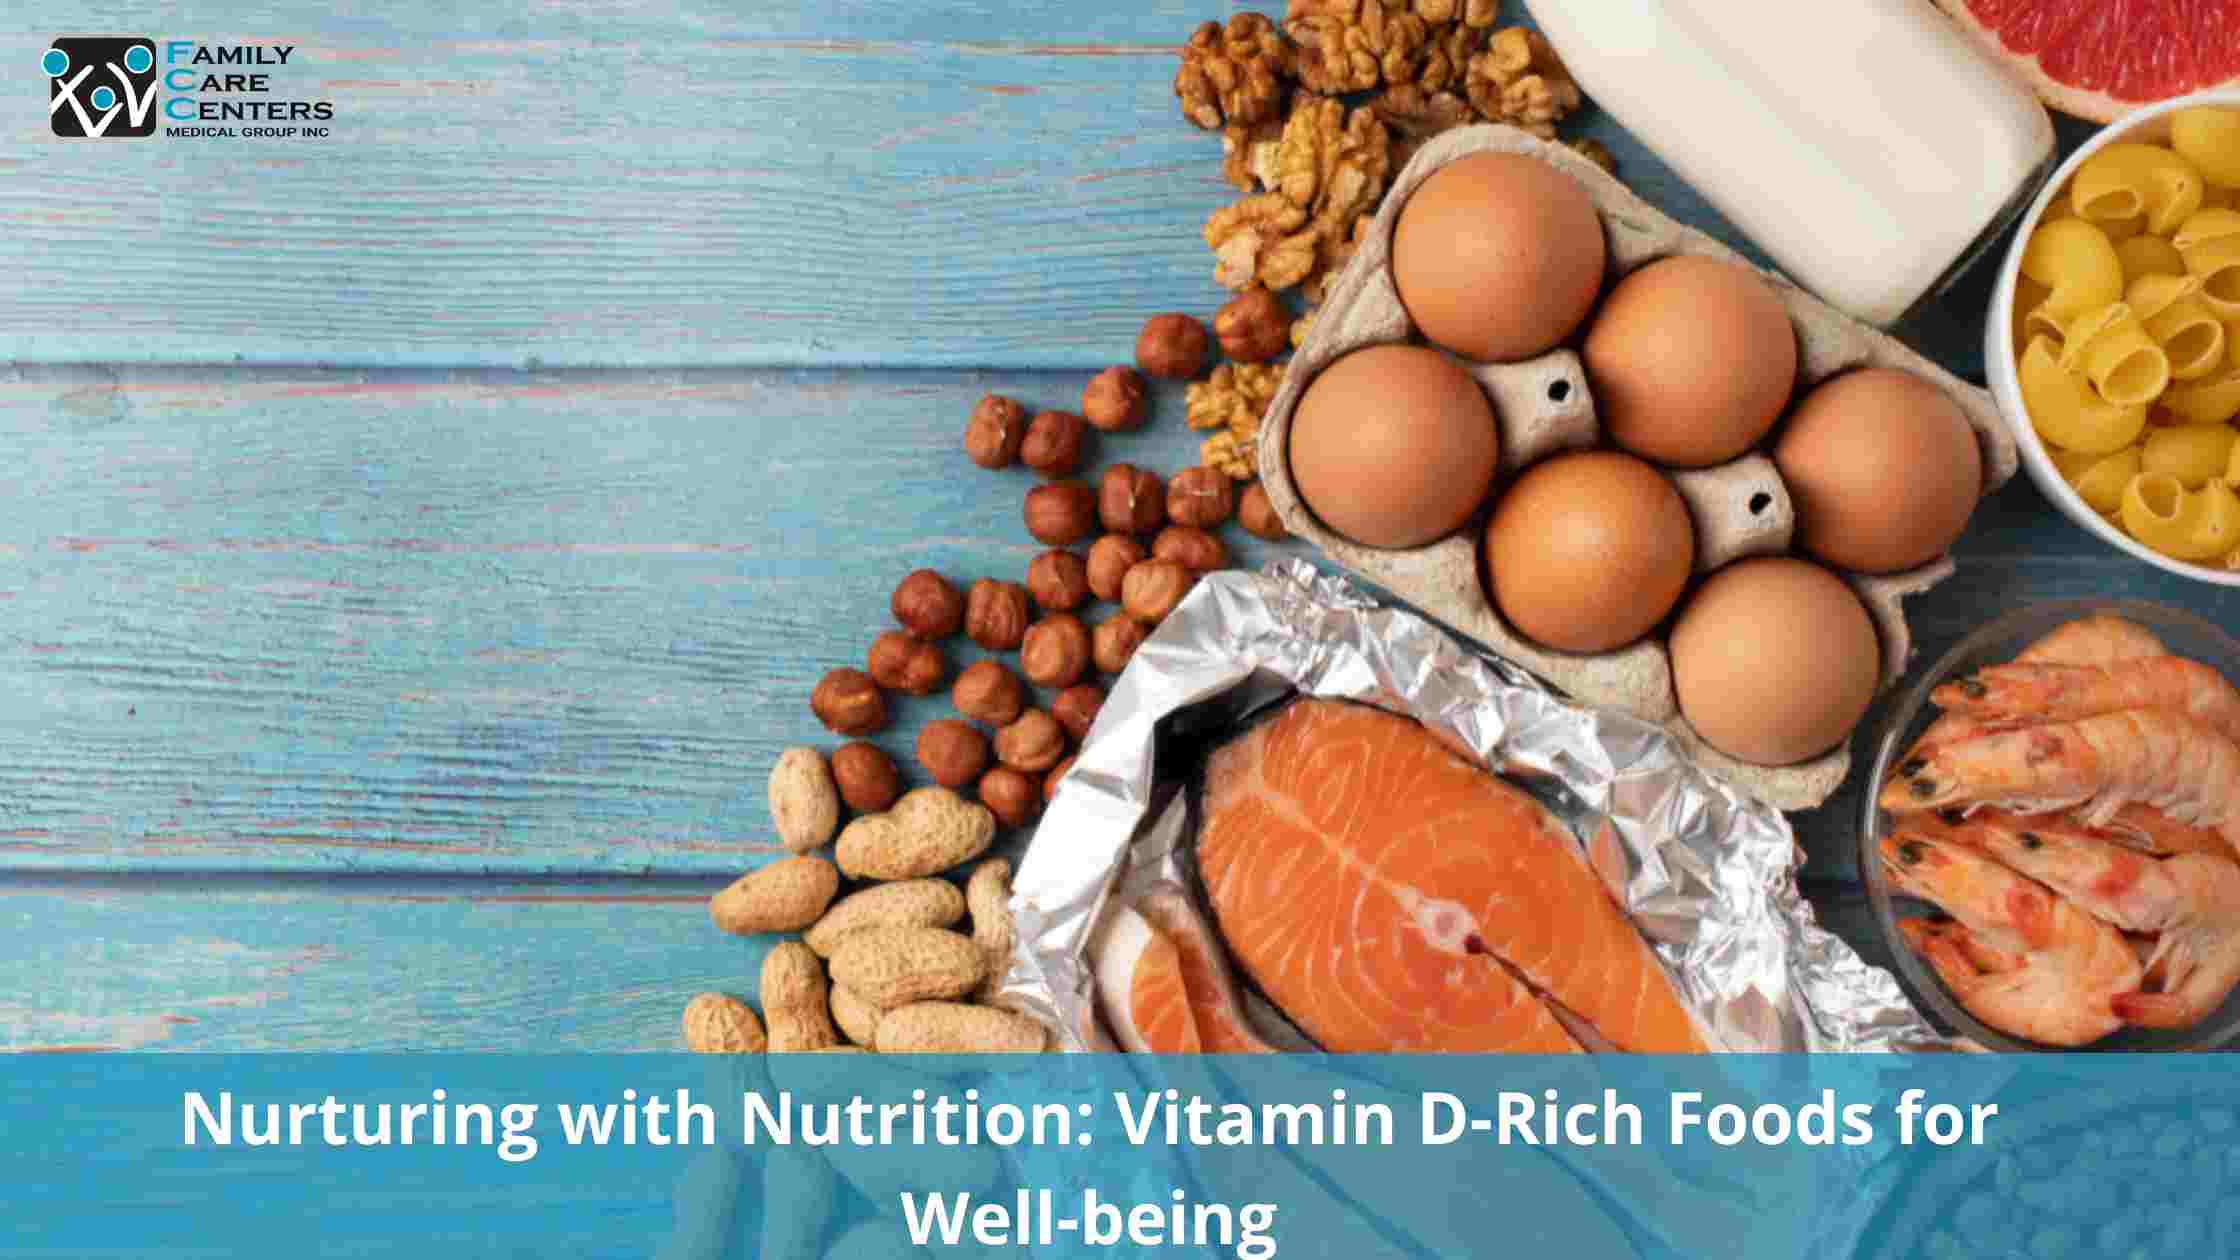 Nurturing with Nutrition: Vitamin D-Rich Foods for Well-Being